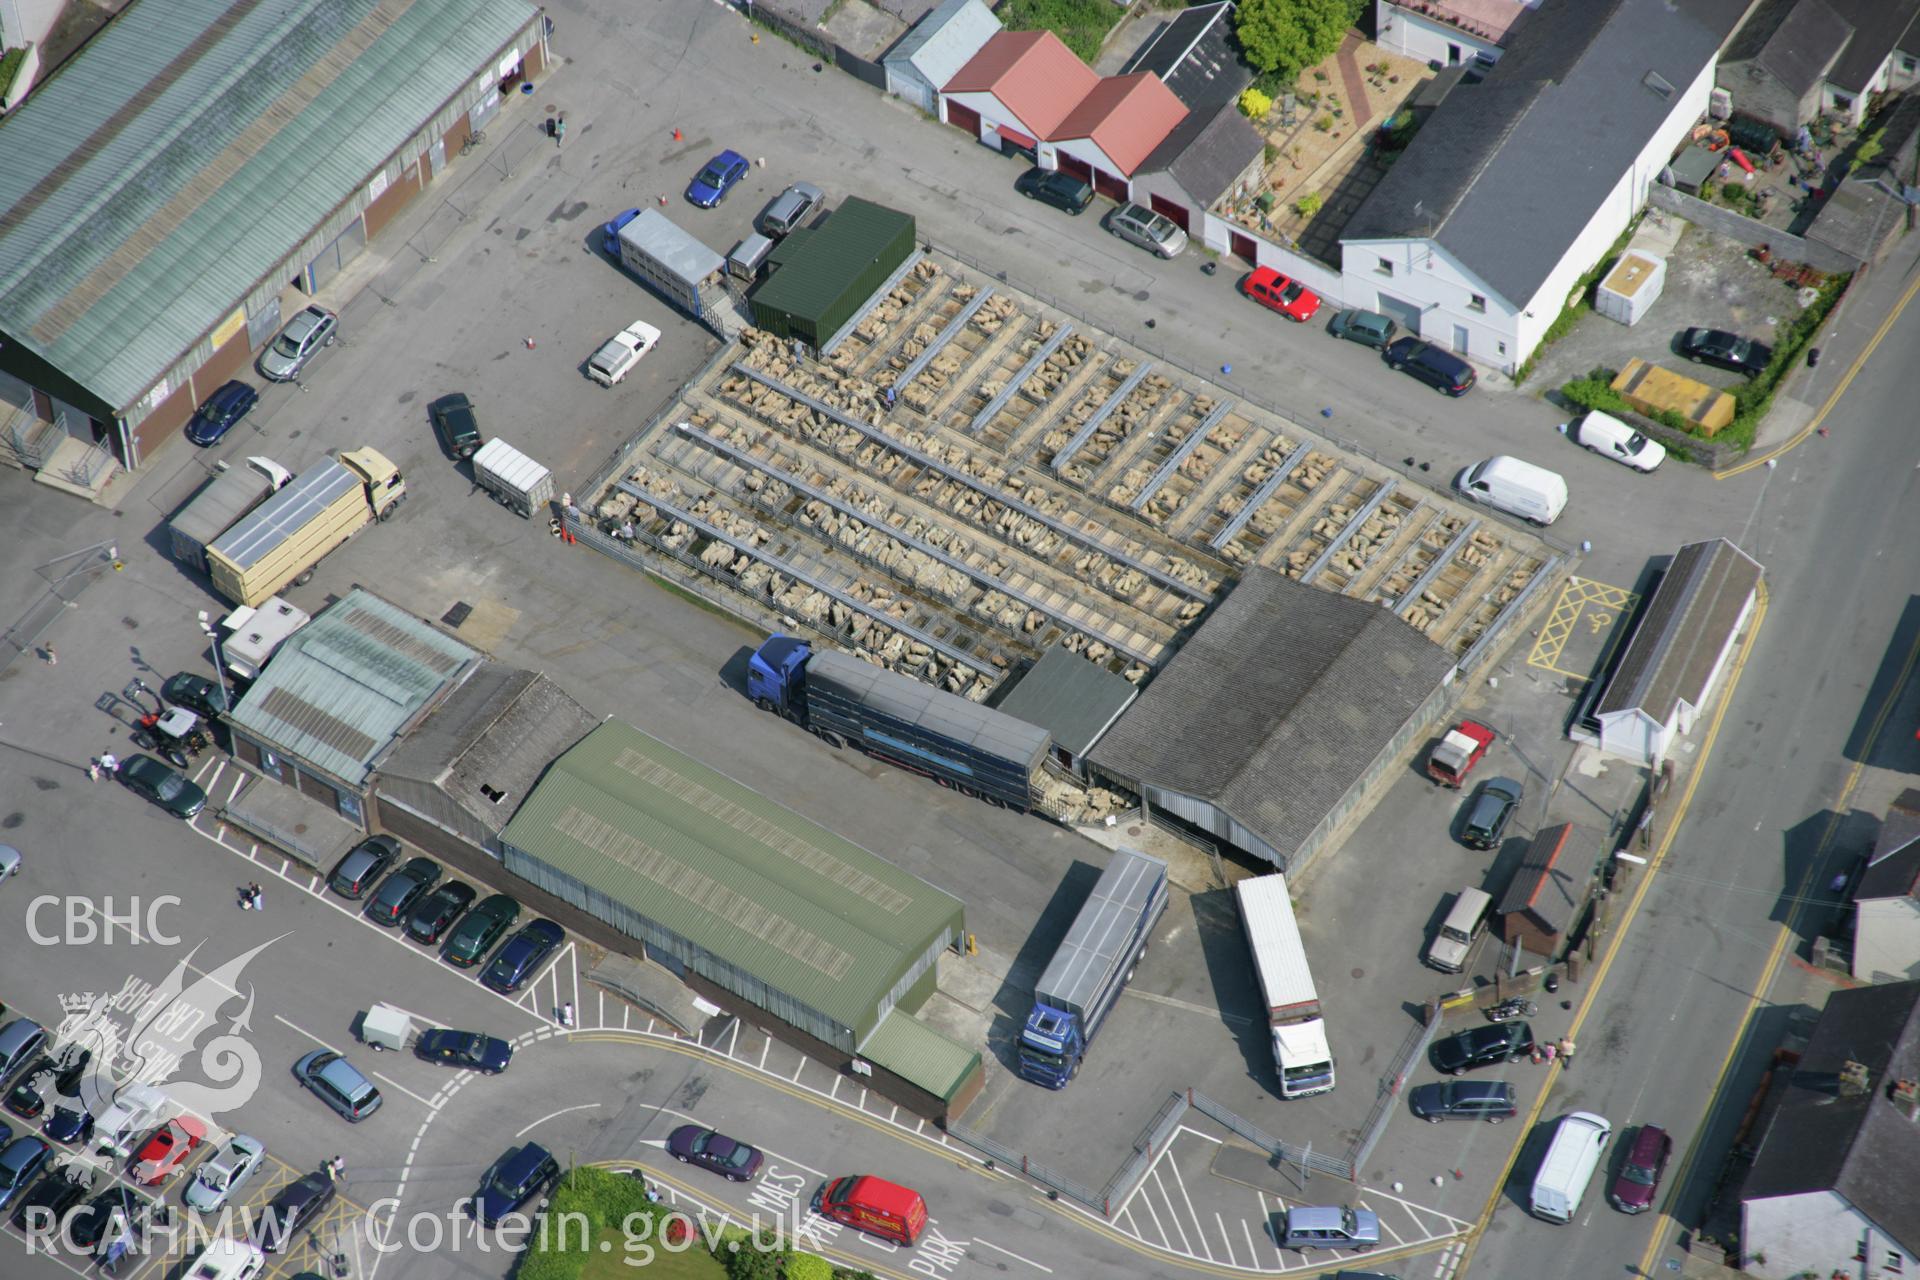 RCAHMW colour oblique aerial photograph of Newcastle Emlyn, showing view of livestock market from the south-west. Taken on 08 June 2006 by Toby Driver.